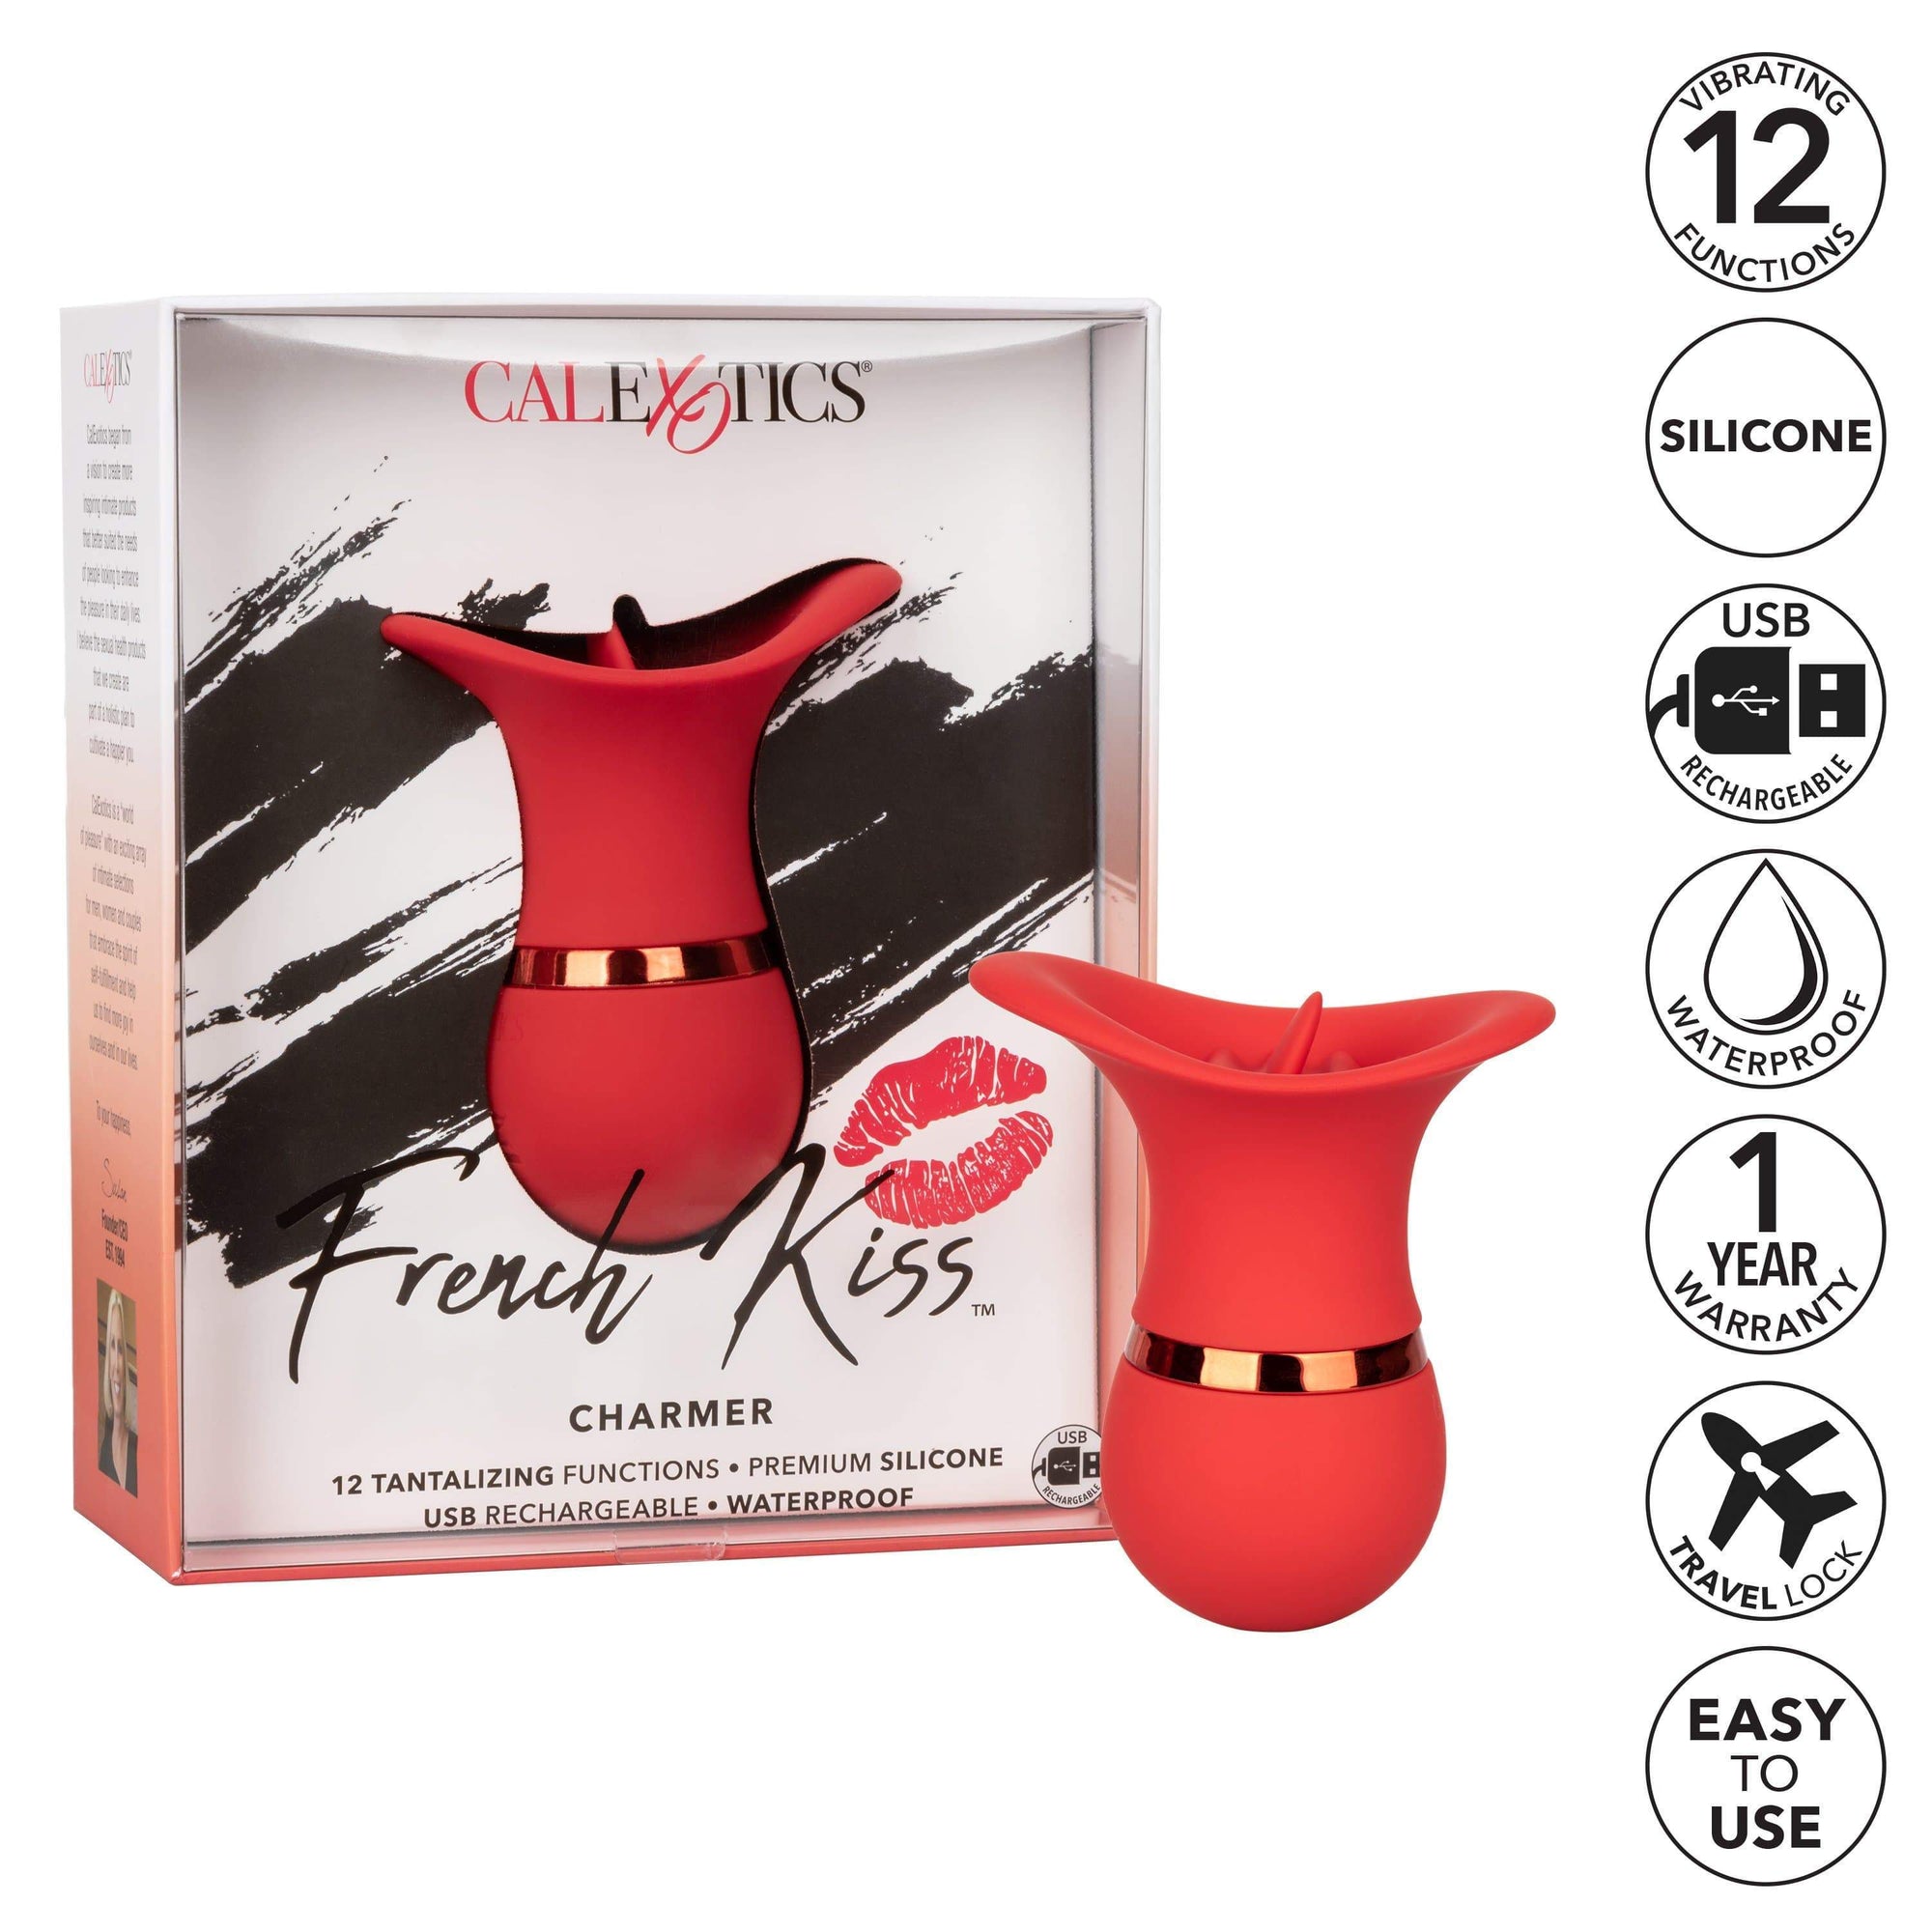 California Exotics - French Kiss Charmer Clit Massager (Red) Clit Massager (Vibration) Rechargeable 716770094780 CherryAffairs